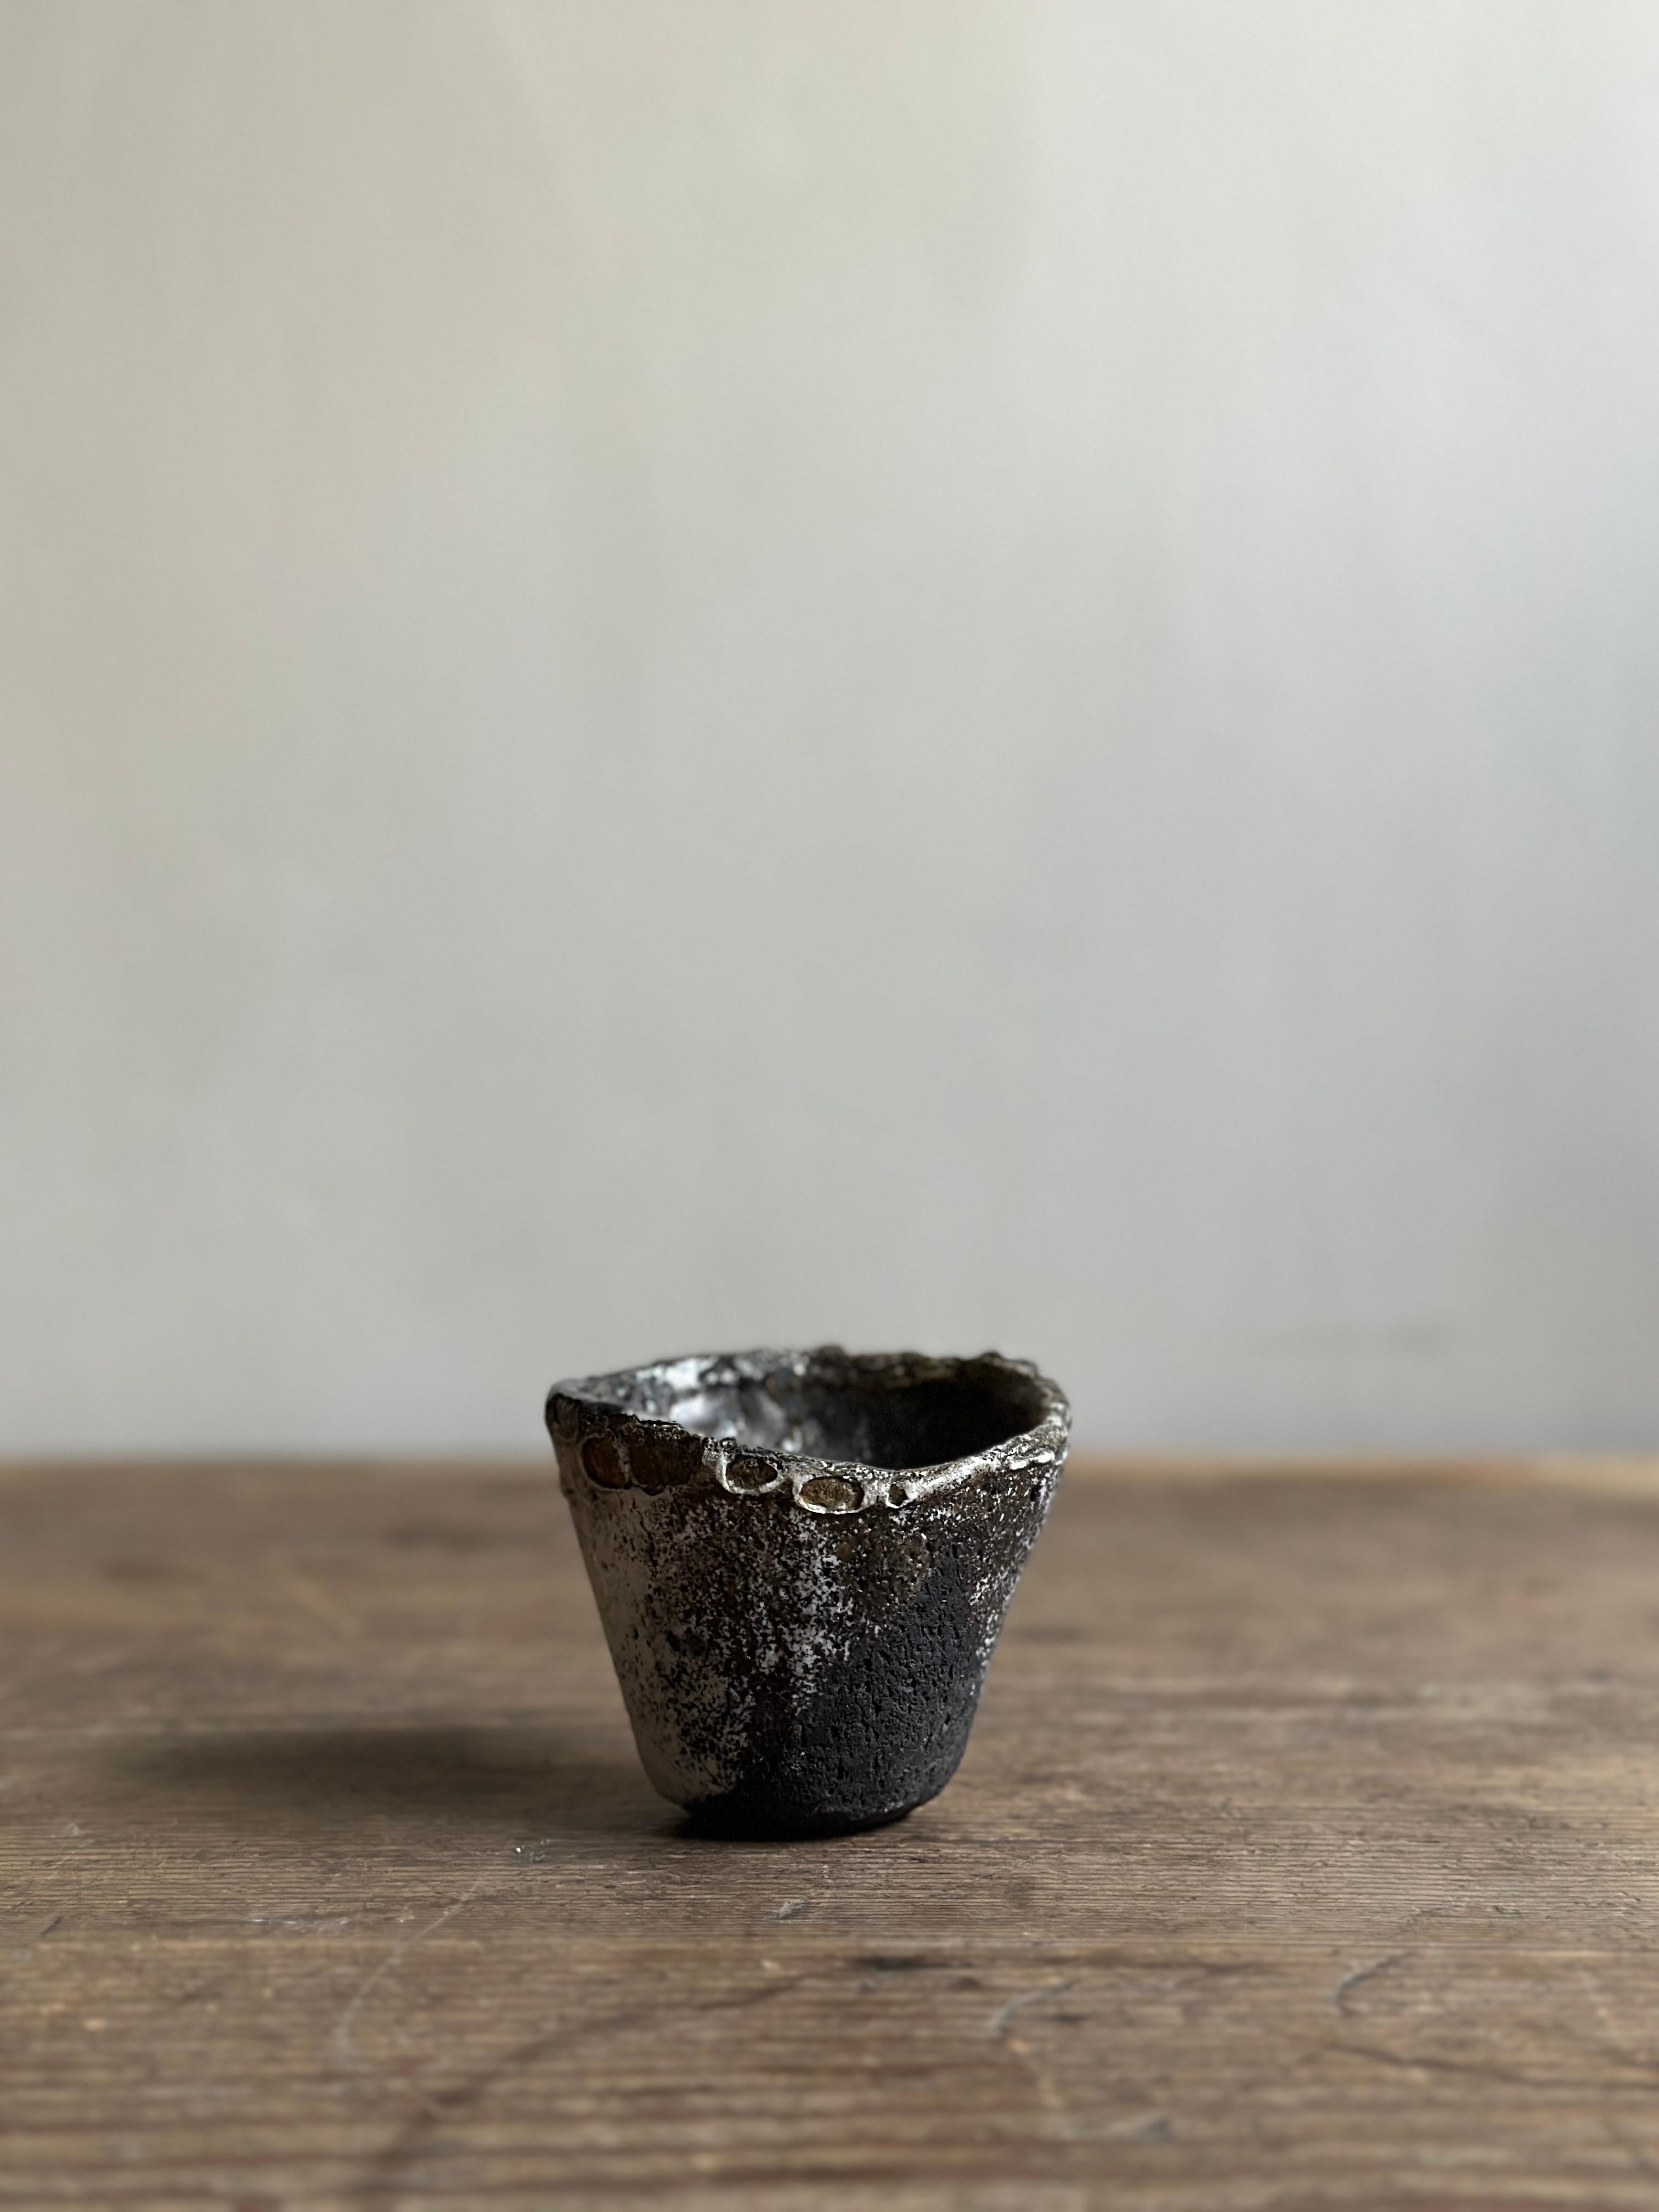 A Wabi Sabi Vase, hand-crafted in Denmark by Anonymous designer. 

Wear consistent with age and use. 